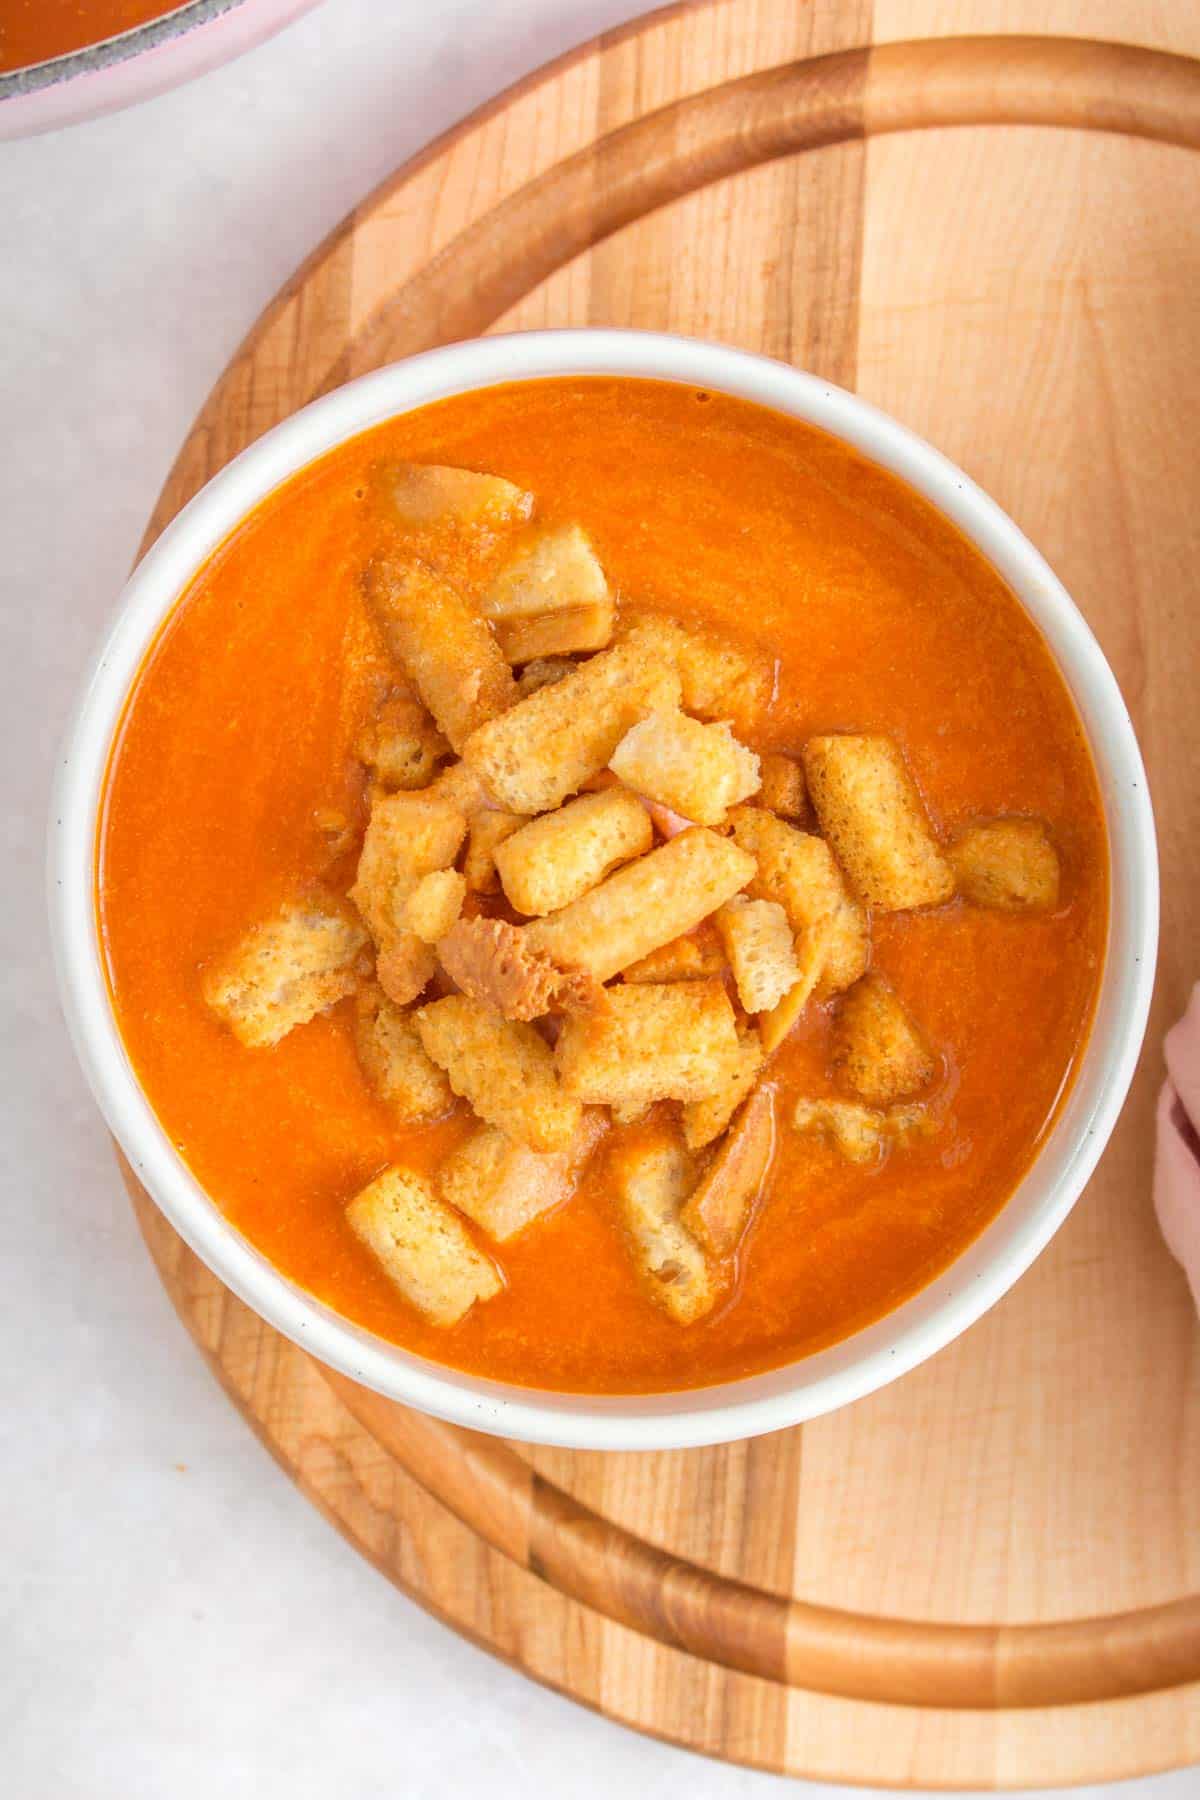 Overhead view of a bowl of bacon tomato soup with croutons.